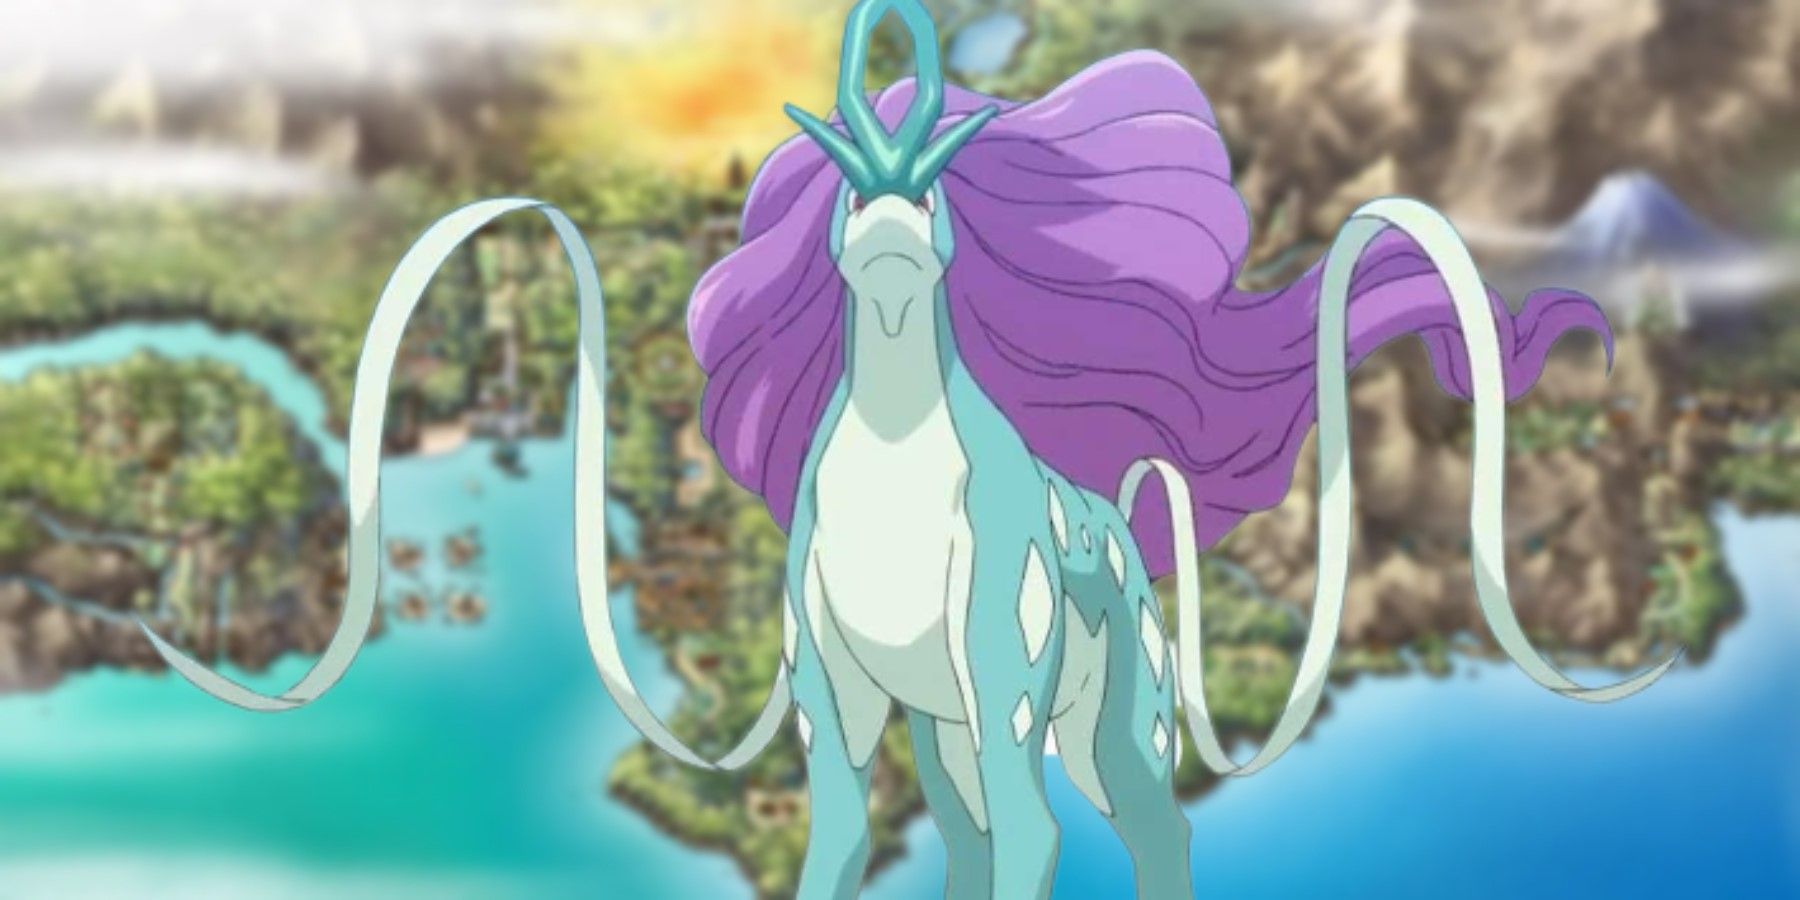 When is Paradox Suicune Releasing in Pokemon Scarlet and Violet? - Answered  - Prima Games